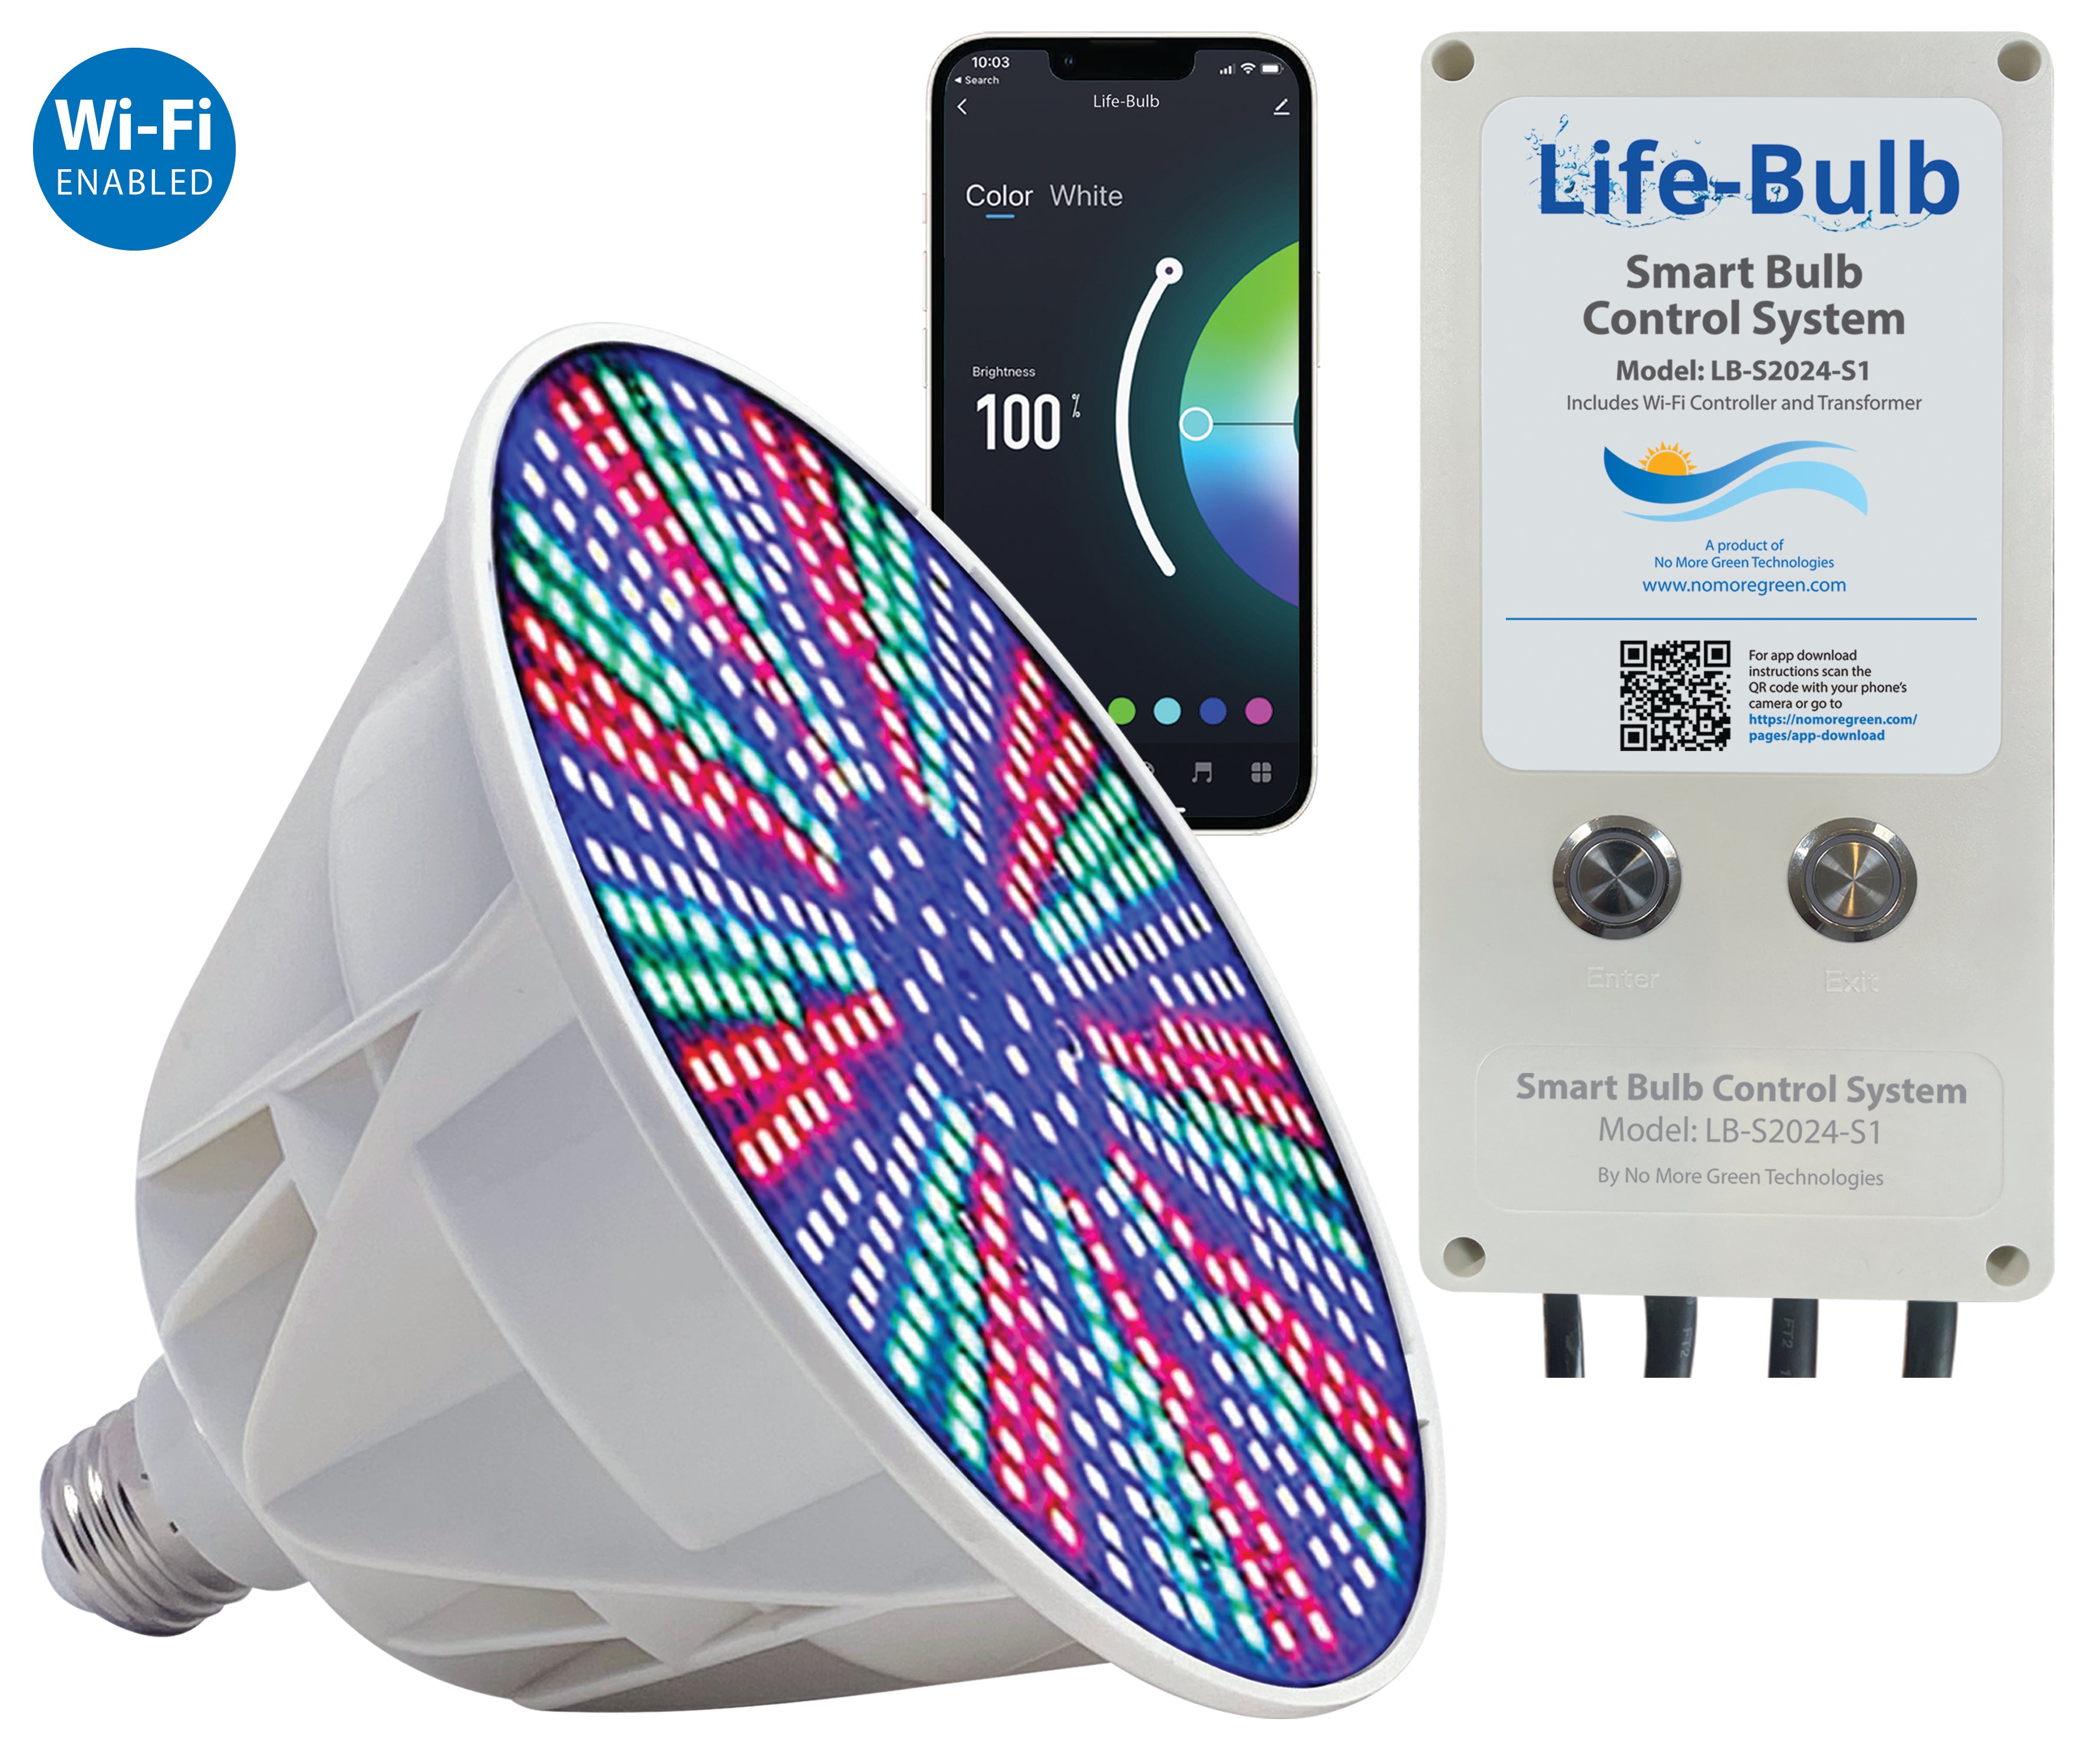 Life-Bulb Smart LED Color Changing Pool Bulb with Smart Bulb Control System | Works with Remote or Smartphone app - iOS or Android | Lifetime Replacement Warranty